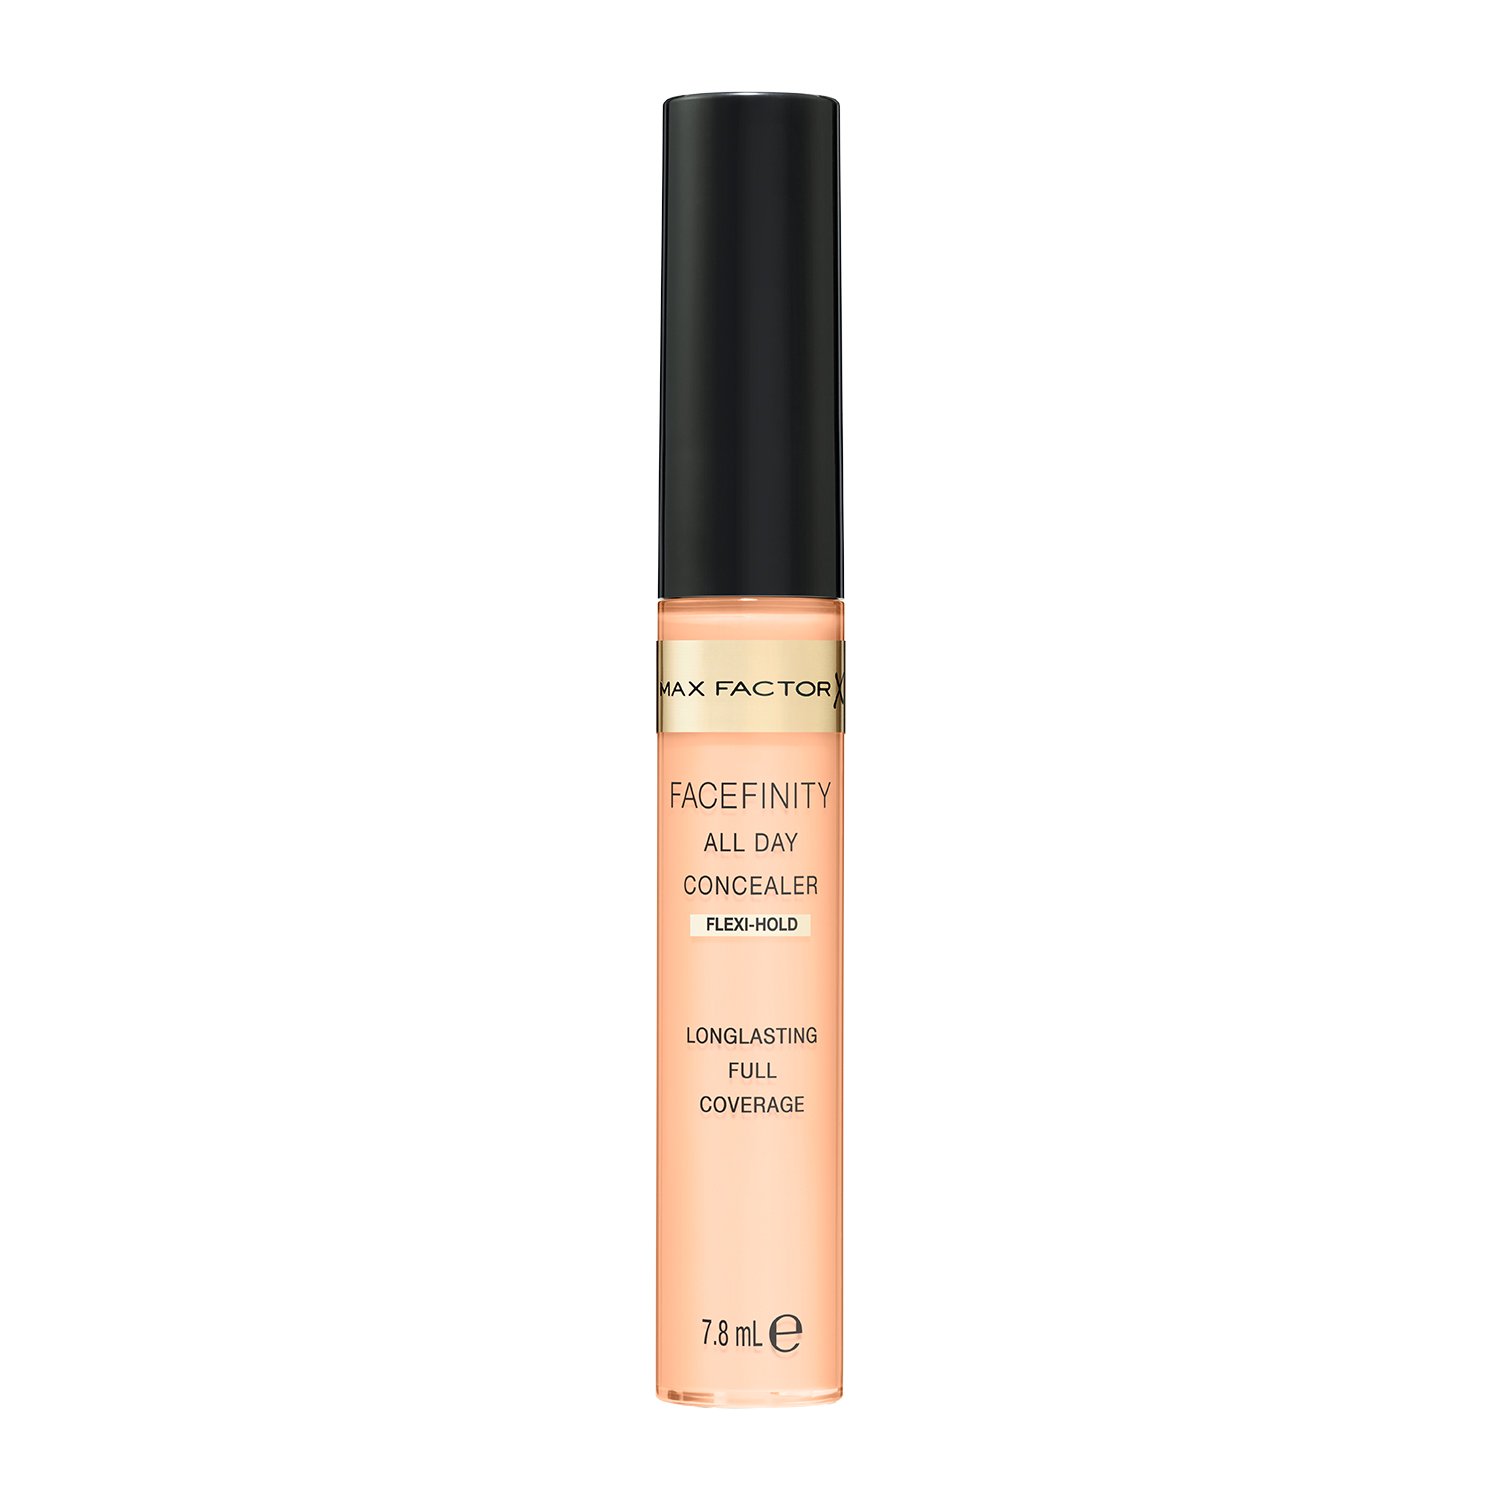 Консилер Max Factor Facefinity All Day Concealer, тон 030, 7,8 мл (8000019012109) - фото 1